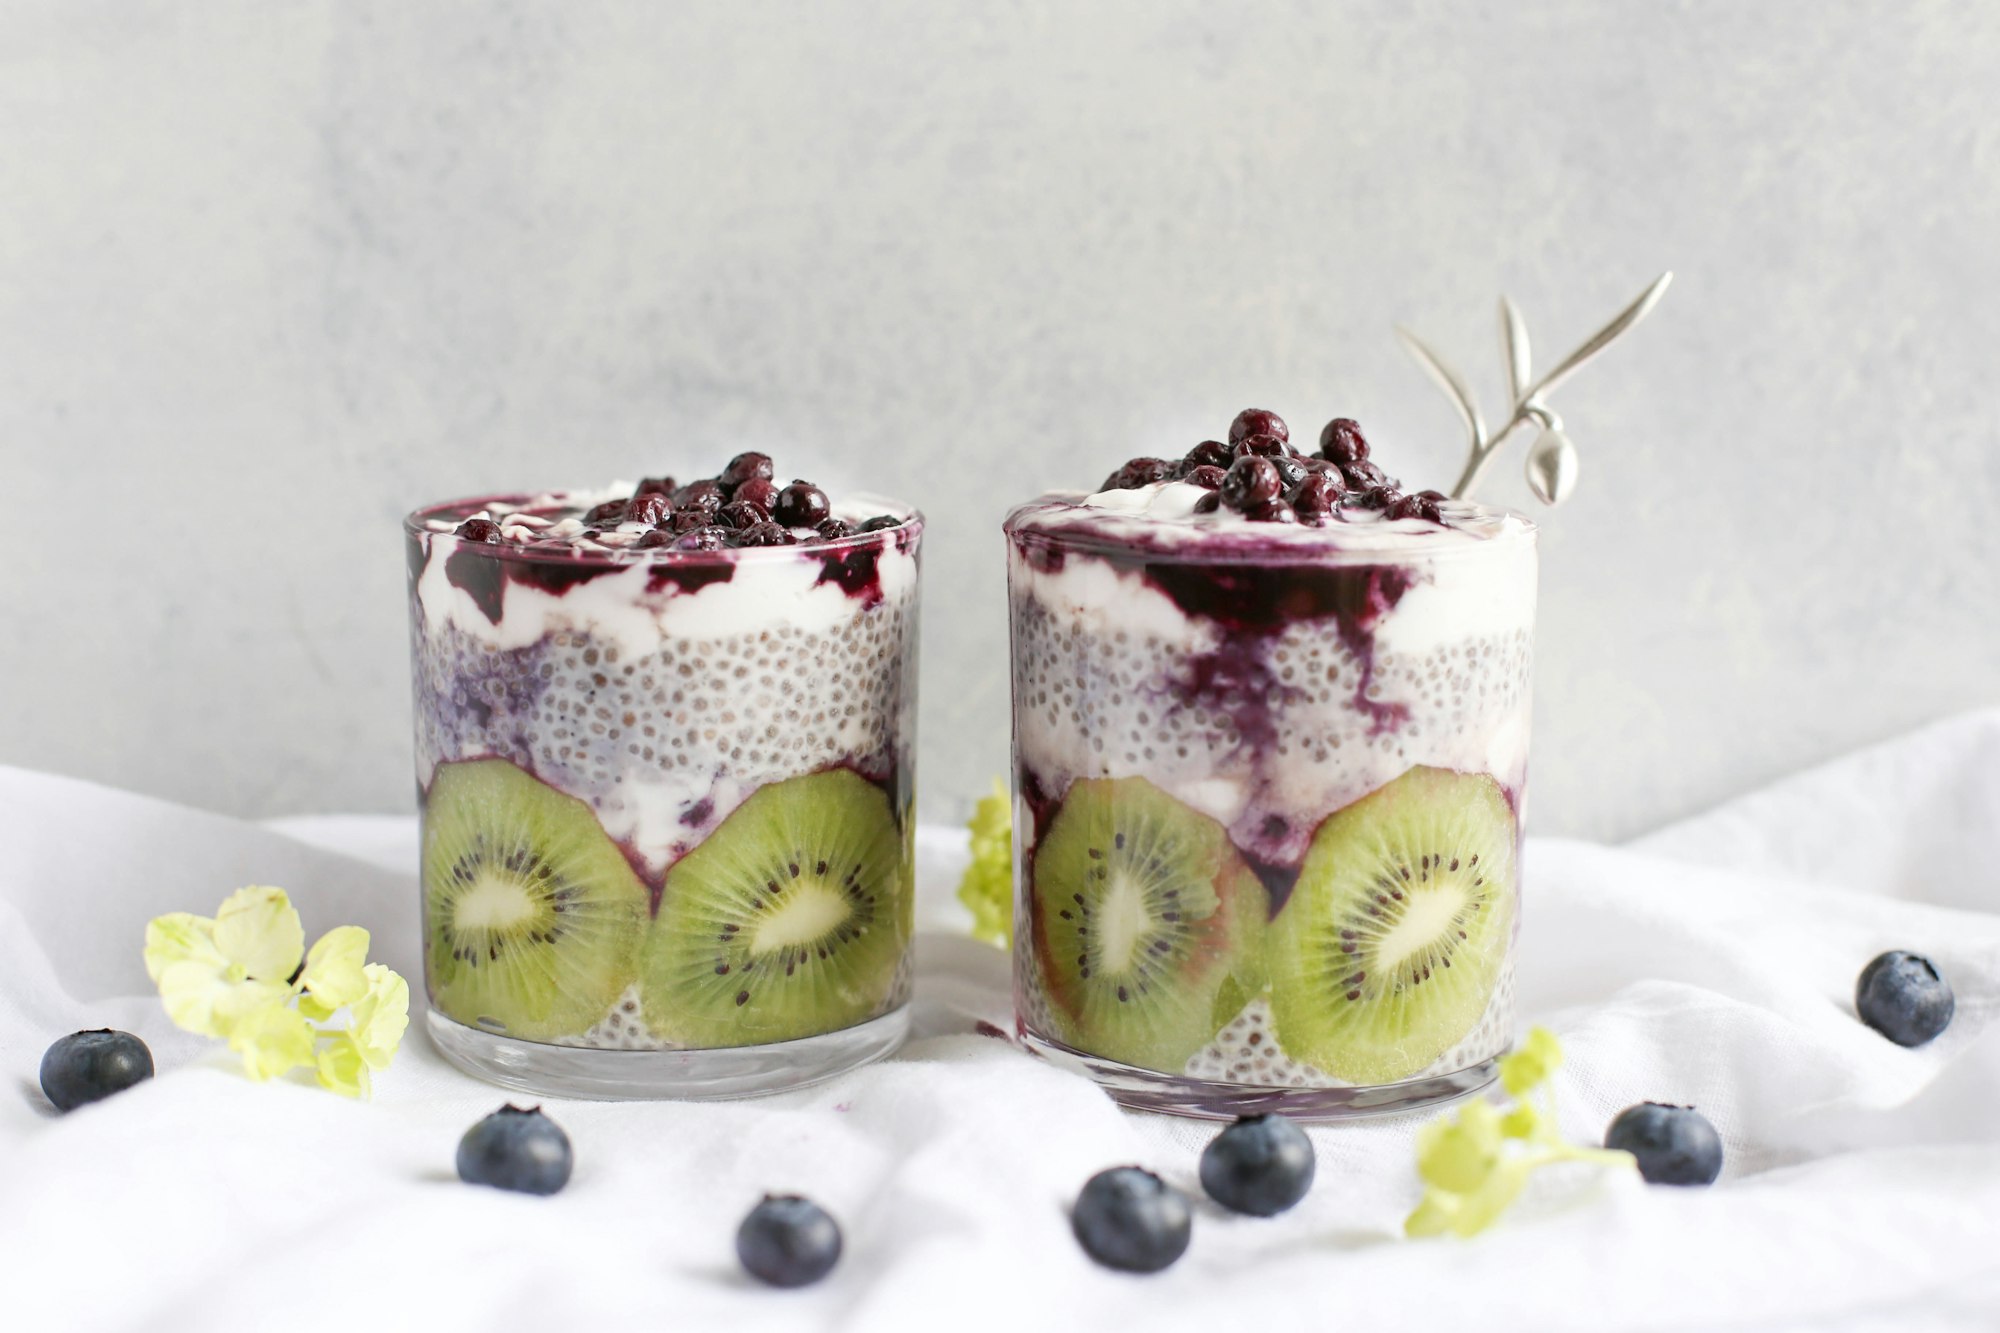 Chia seed pudding is a delicious food that makes you poop by Brenda Godinez for Unsplash.